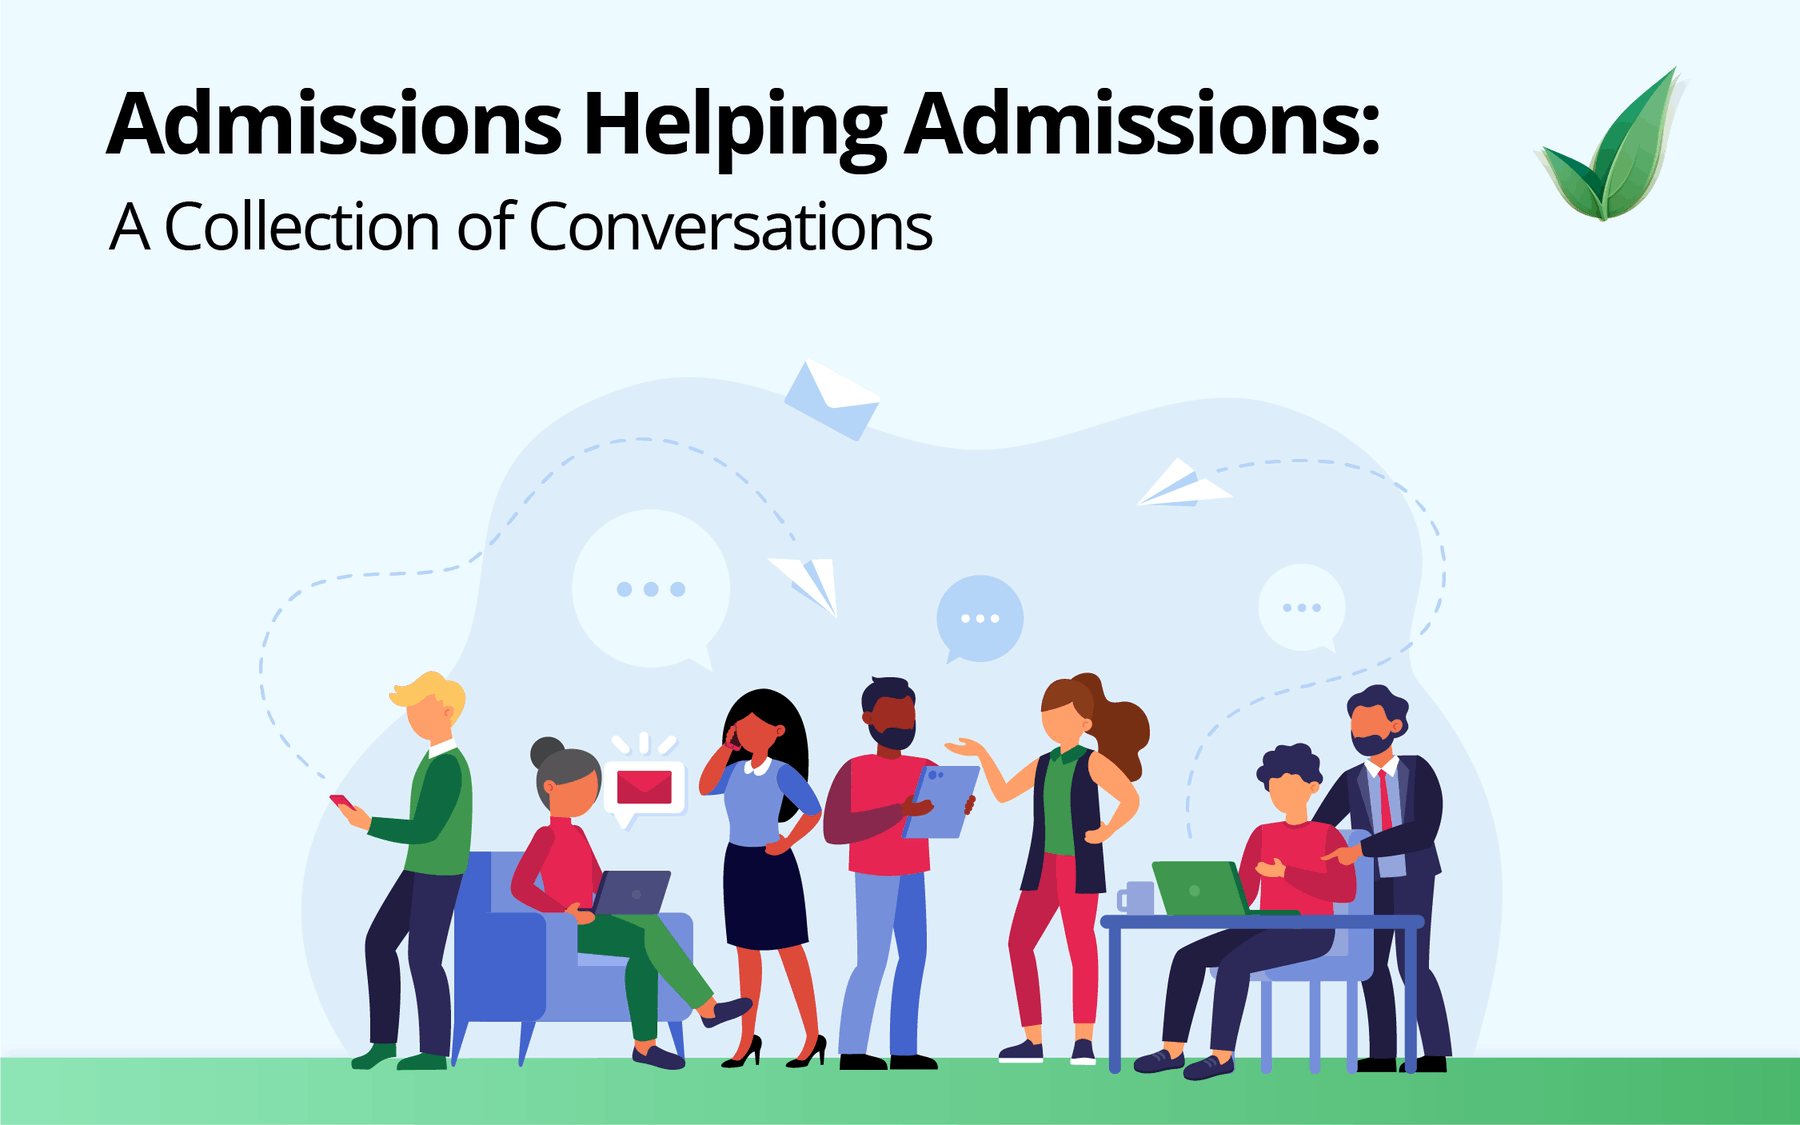 Admissions Helping Admissions: A Collection of Conversations